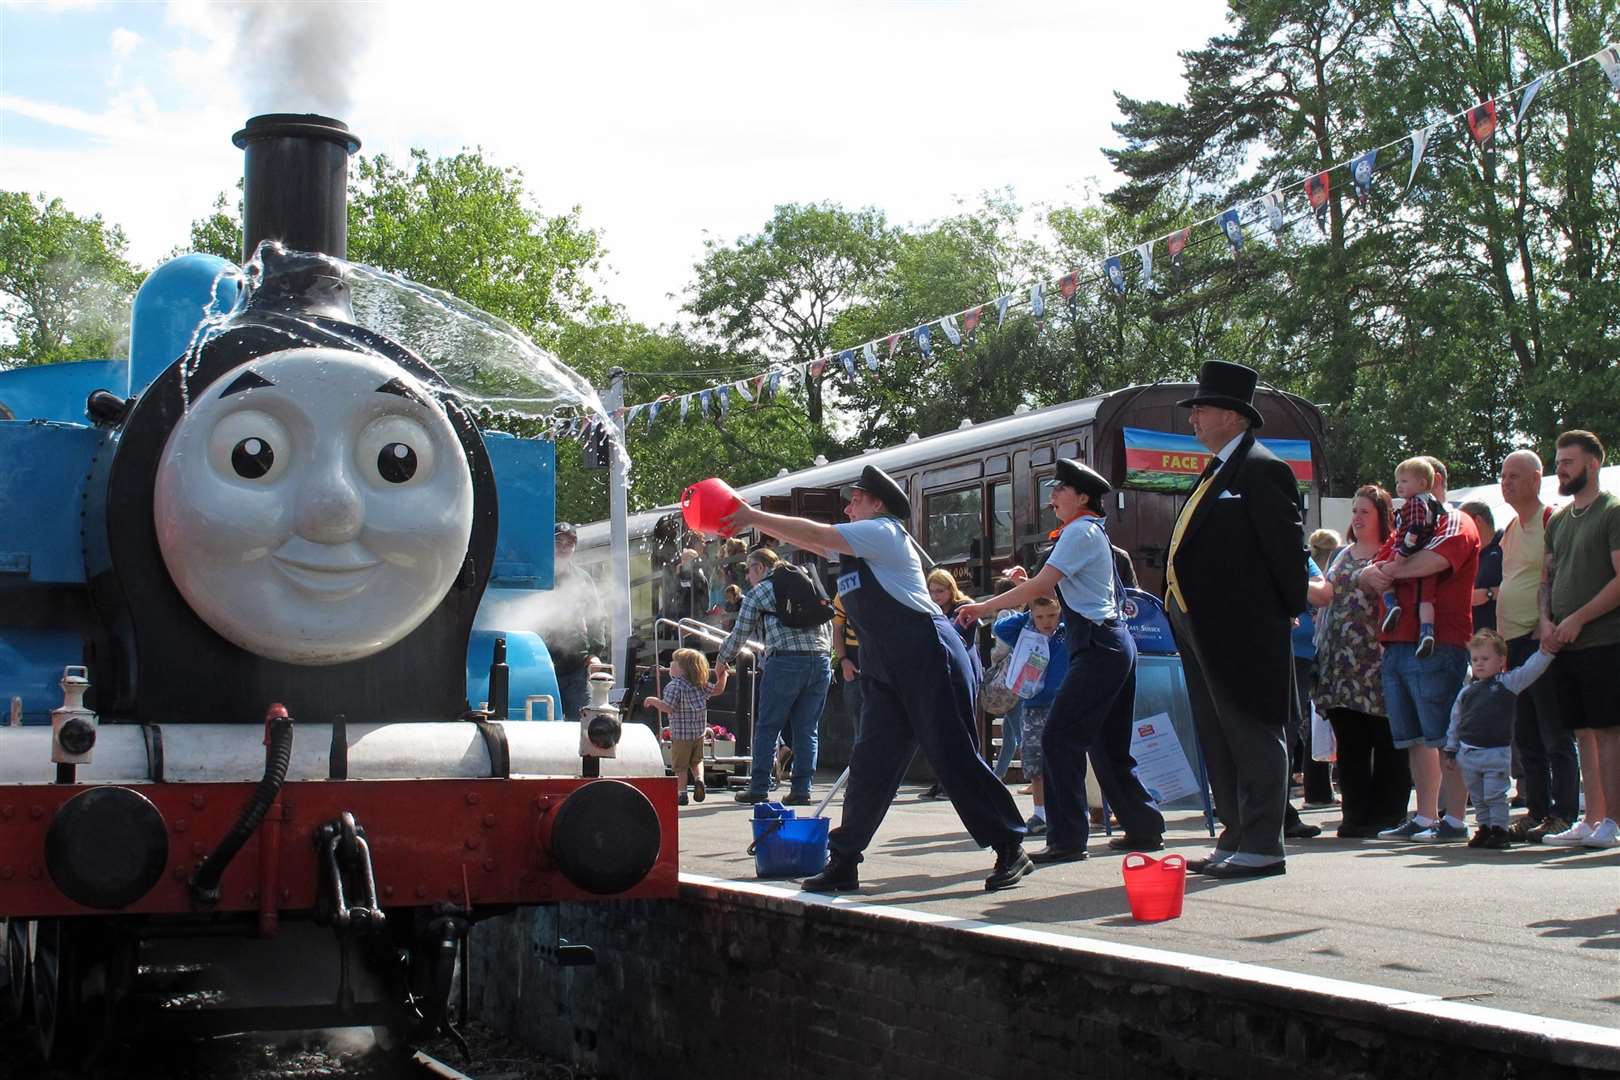 Take the family to see Thomas and his friends